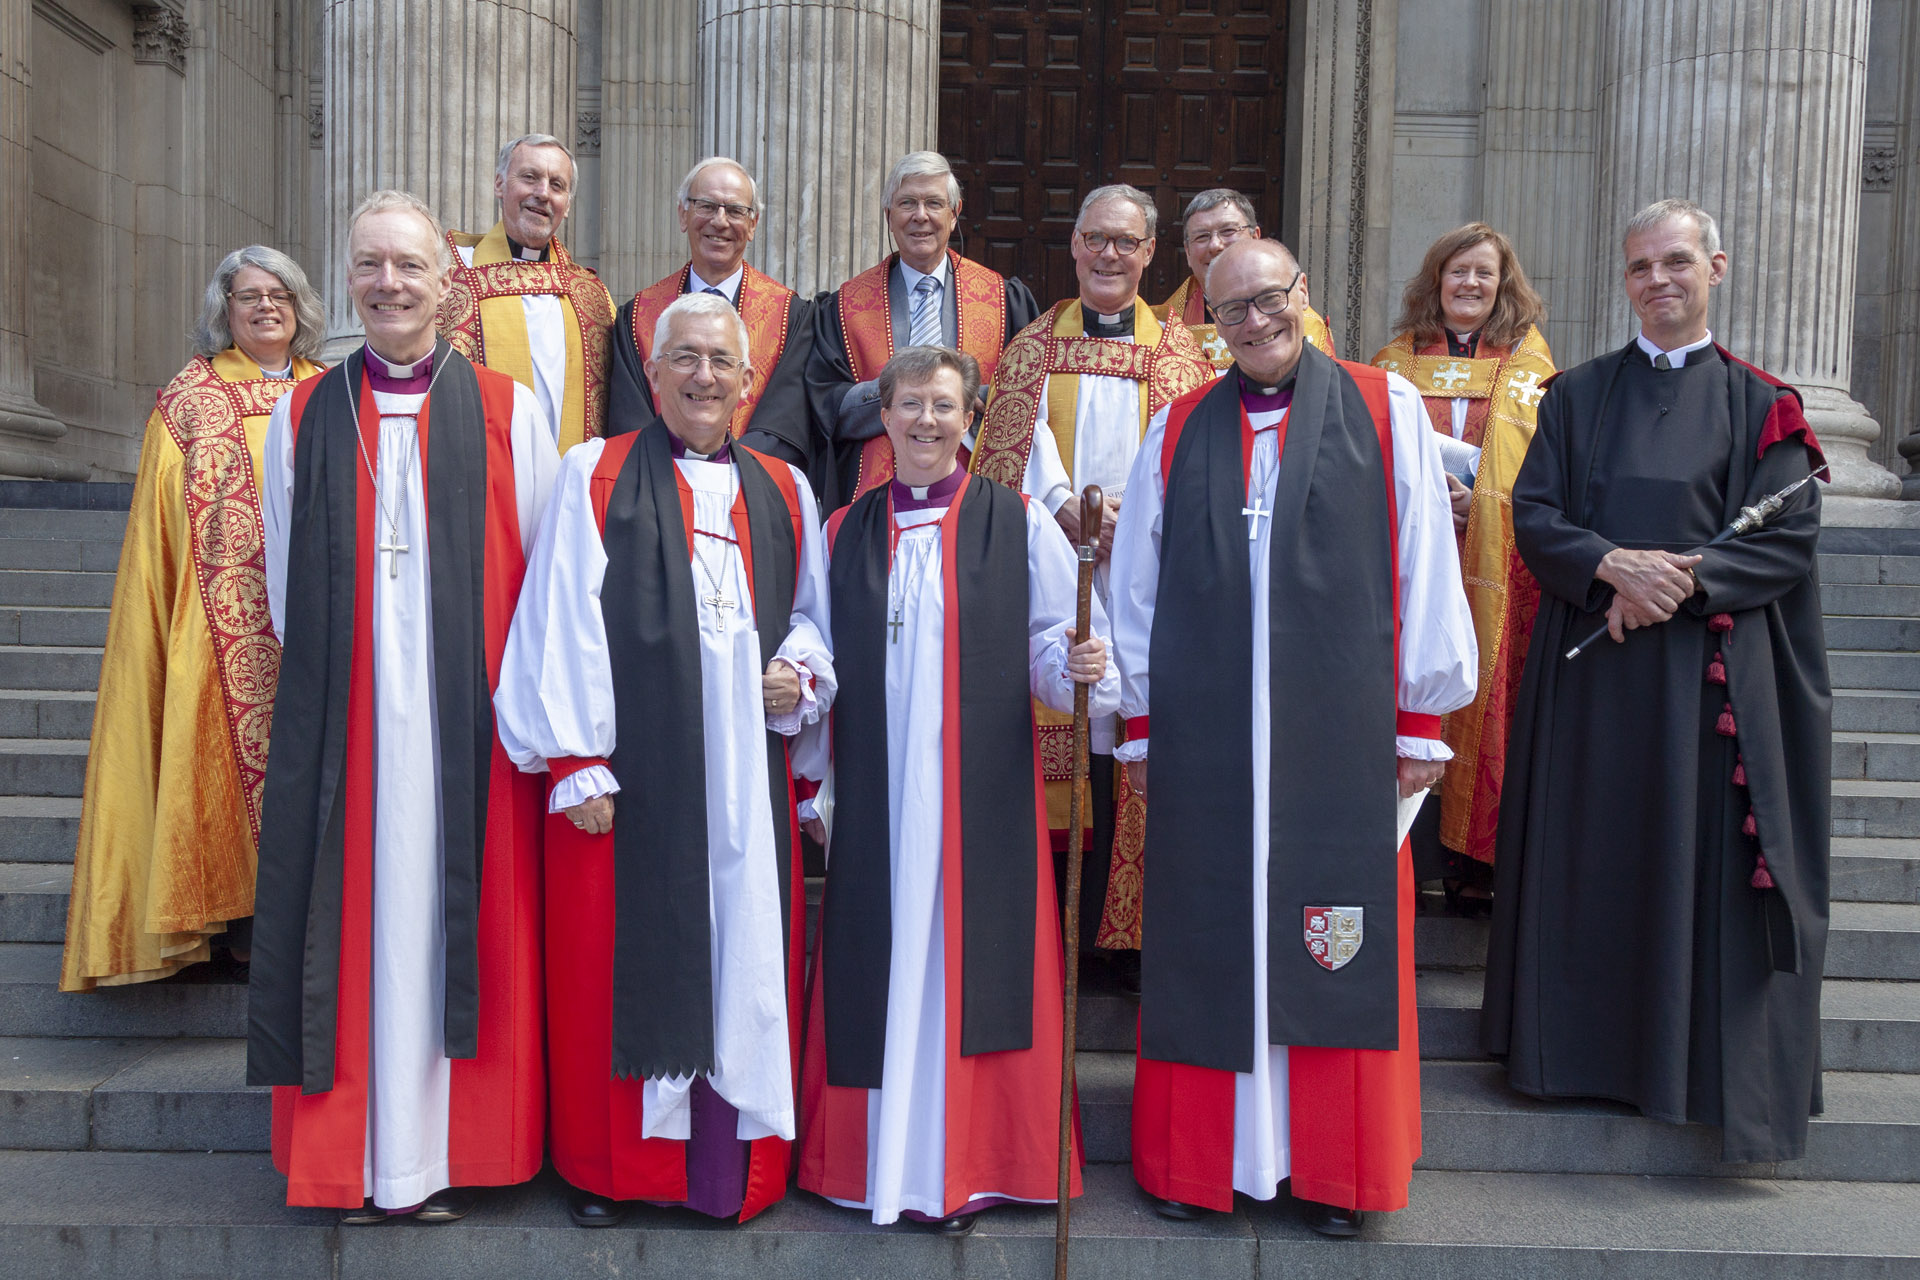 Newly-consecrated Bishop Sarah along with Bishops Michael, Clive & Geoff, Archdeacons and others on the steps of St Pauls Cathedral, London, after the service